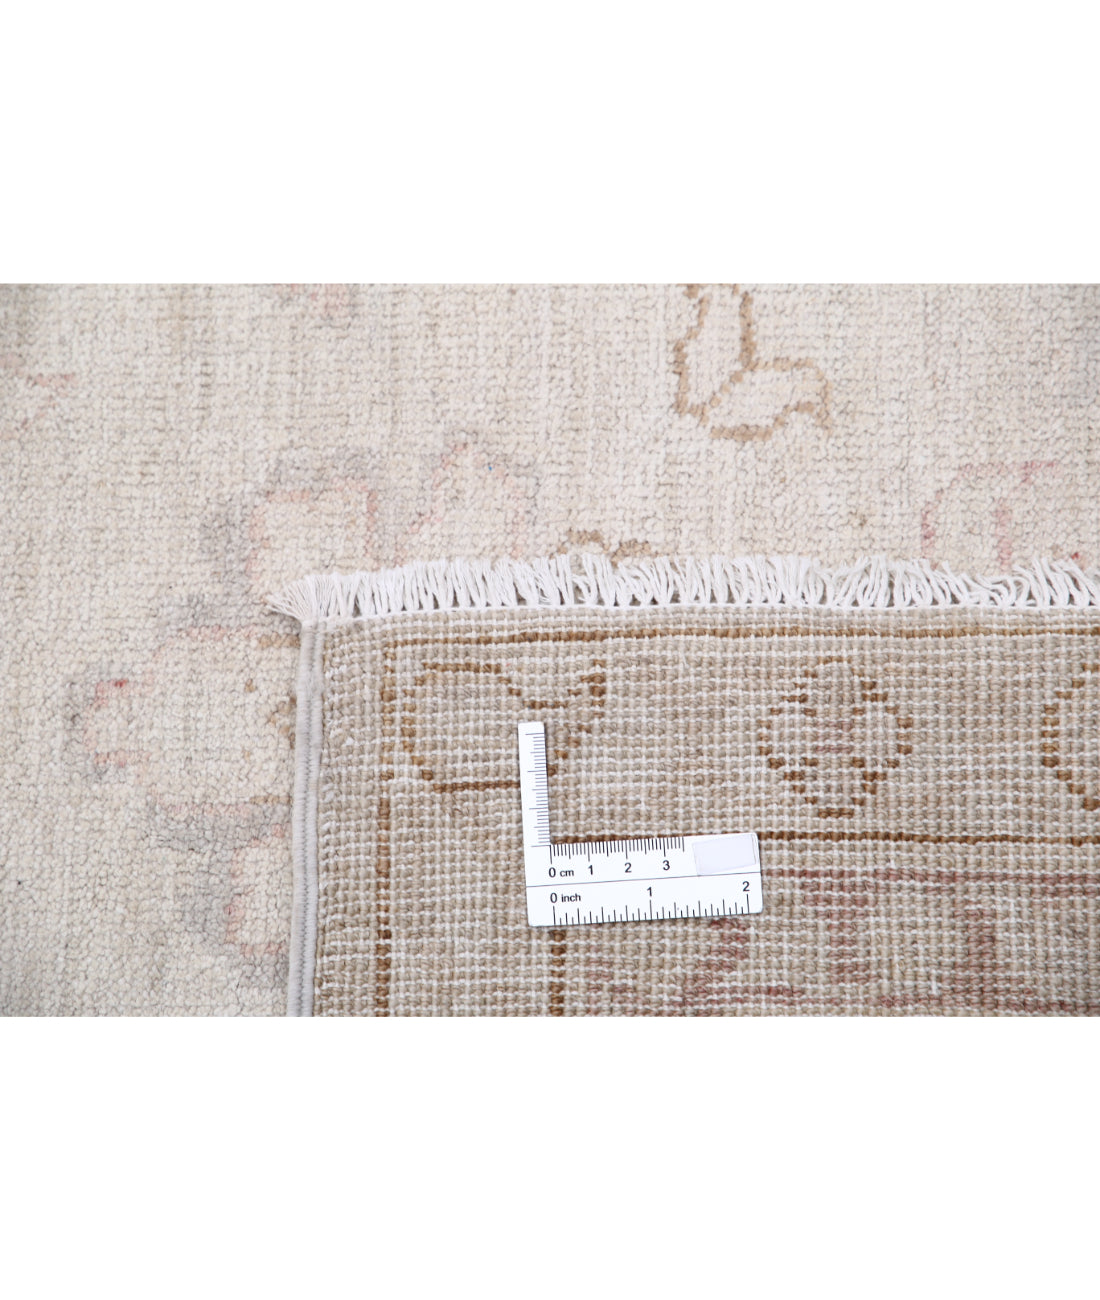 Hand Knotted Serenity Wool Rug - 7'10'' x 9'8'' 7'10'' x 9'8'' (235 X 290) / Ivory / Ivory